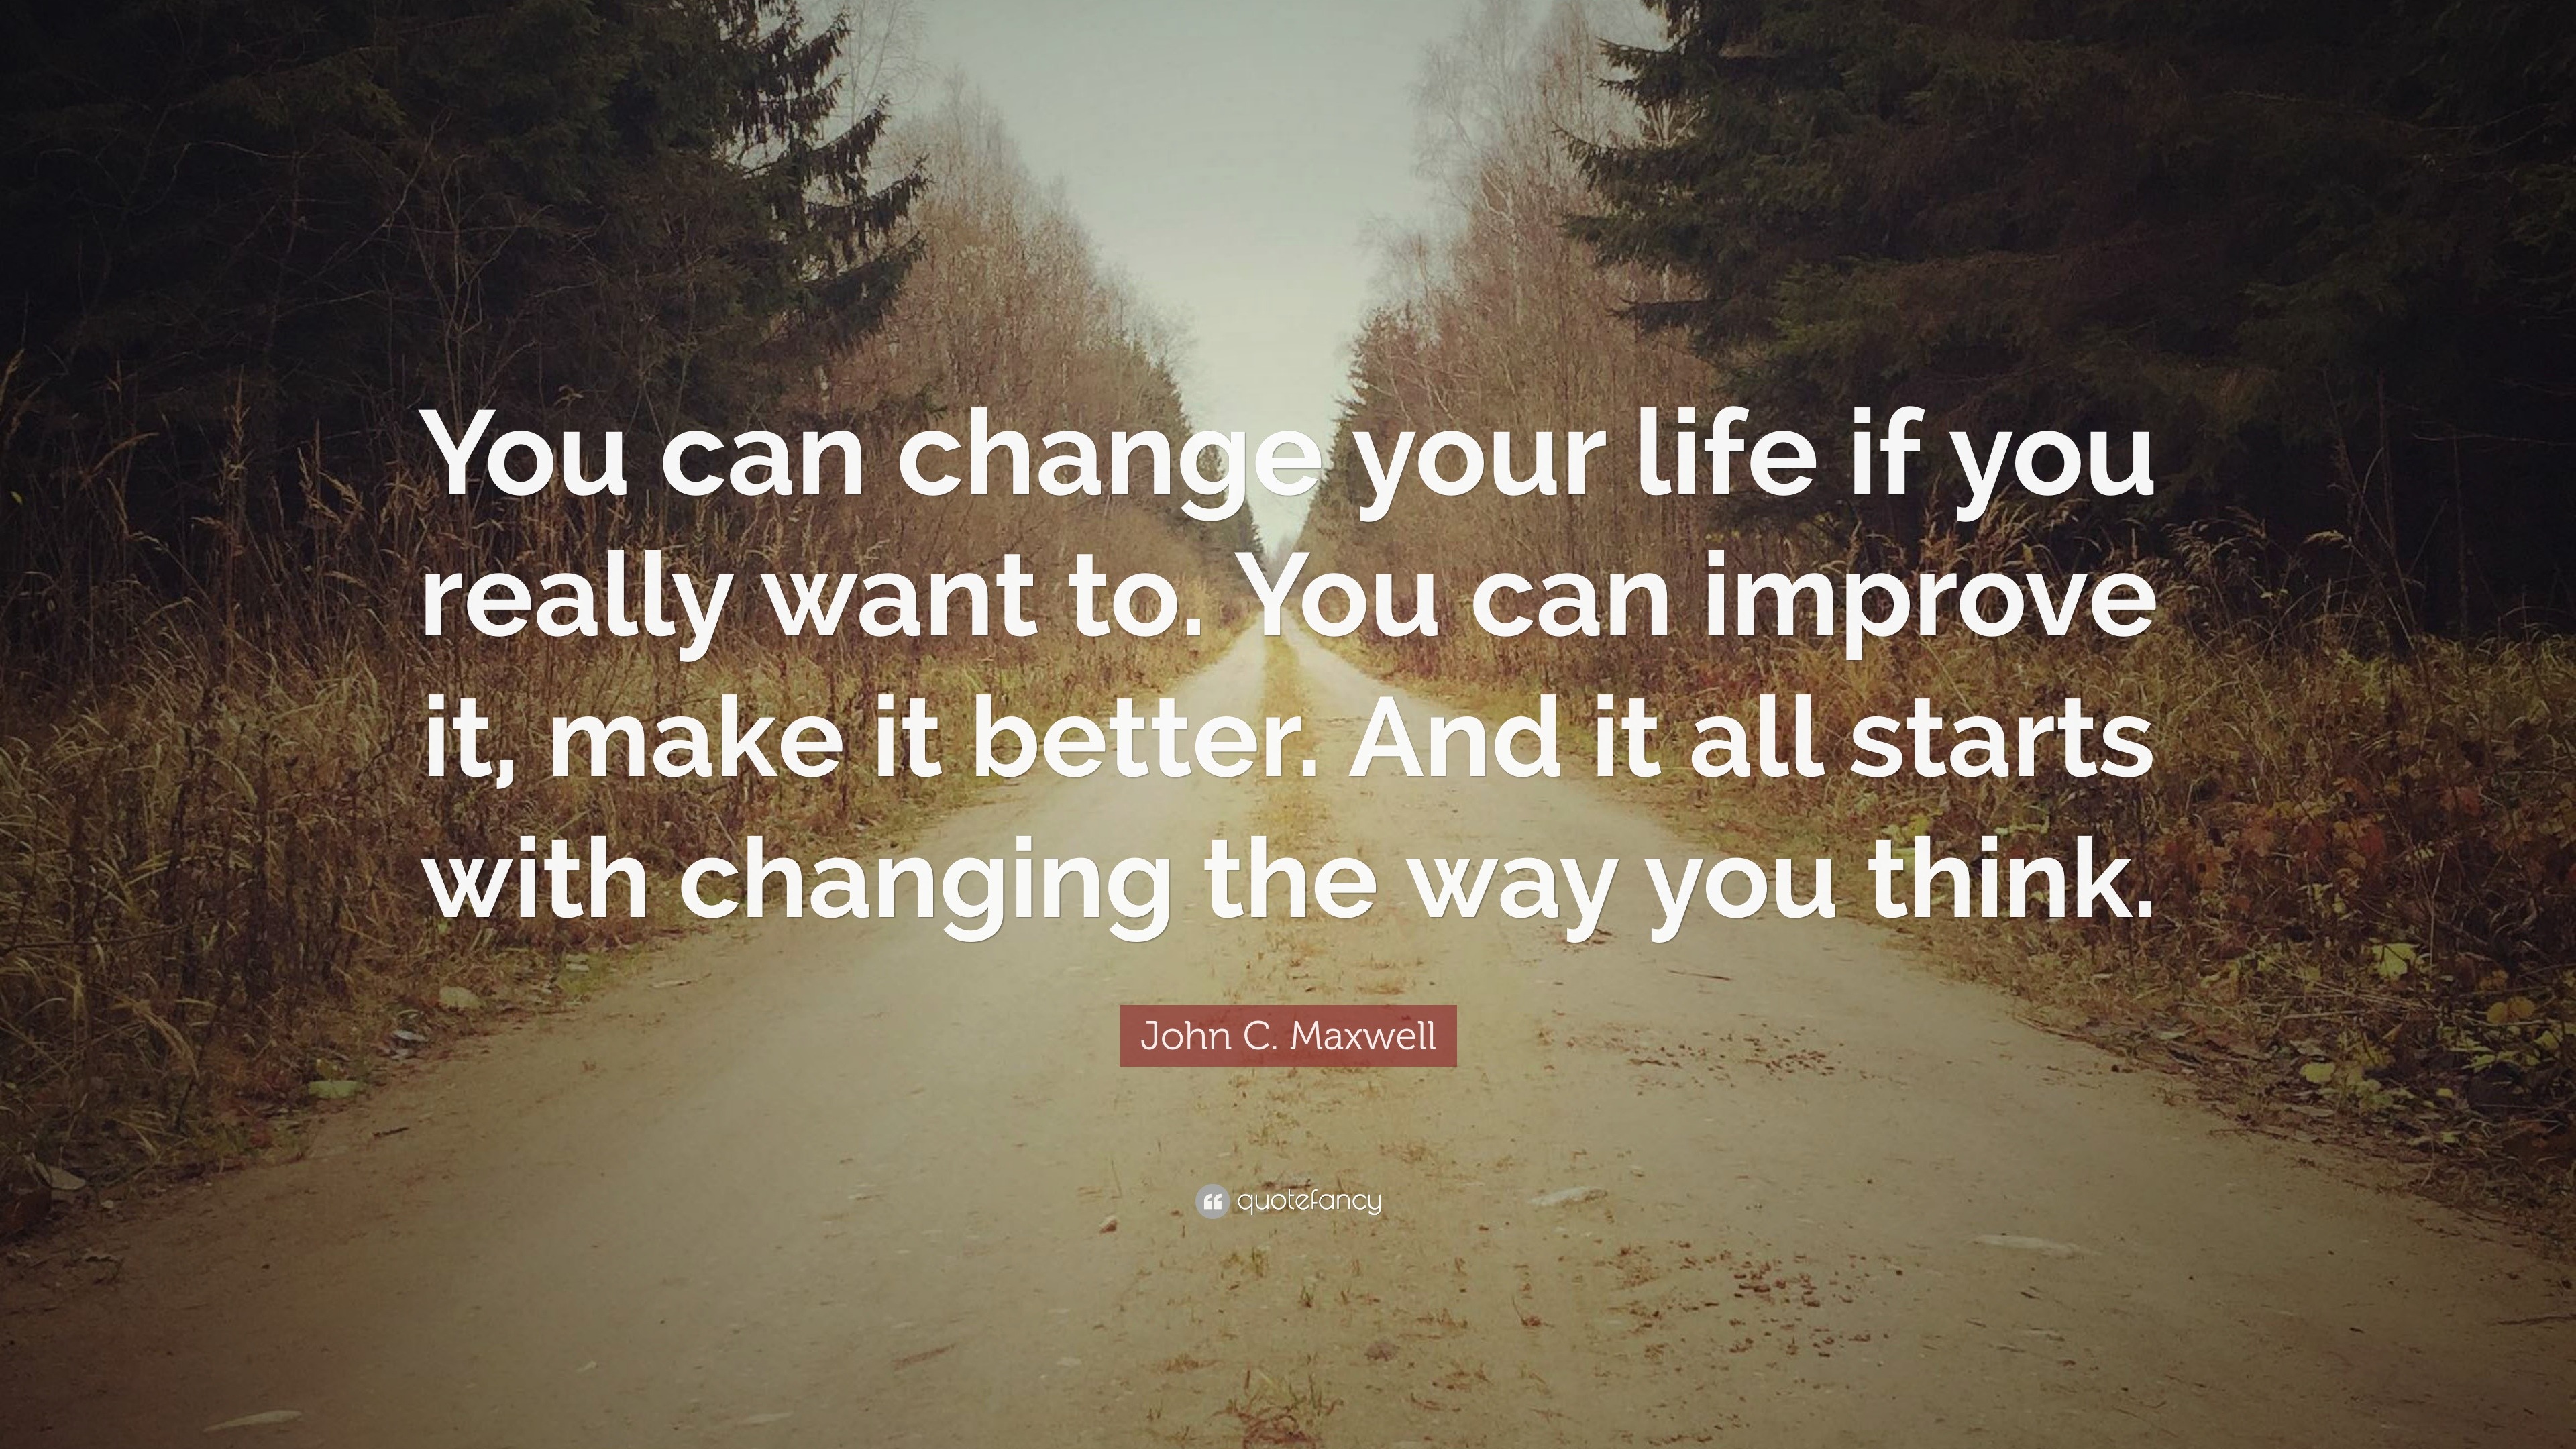 John C. Maxwell Quote “You can change your life if you really want to